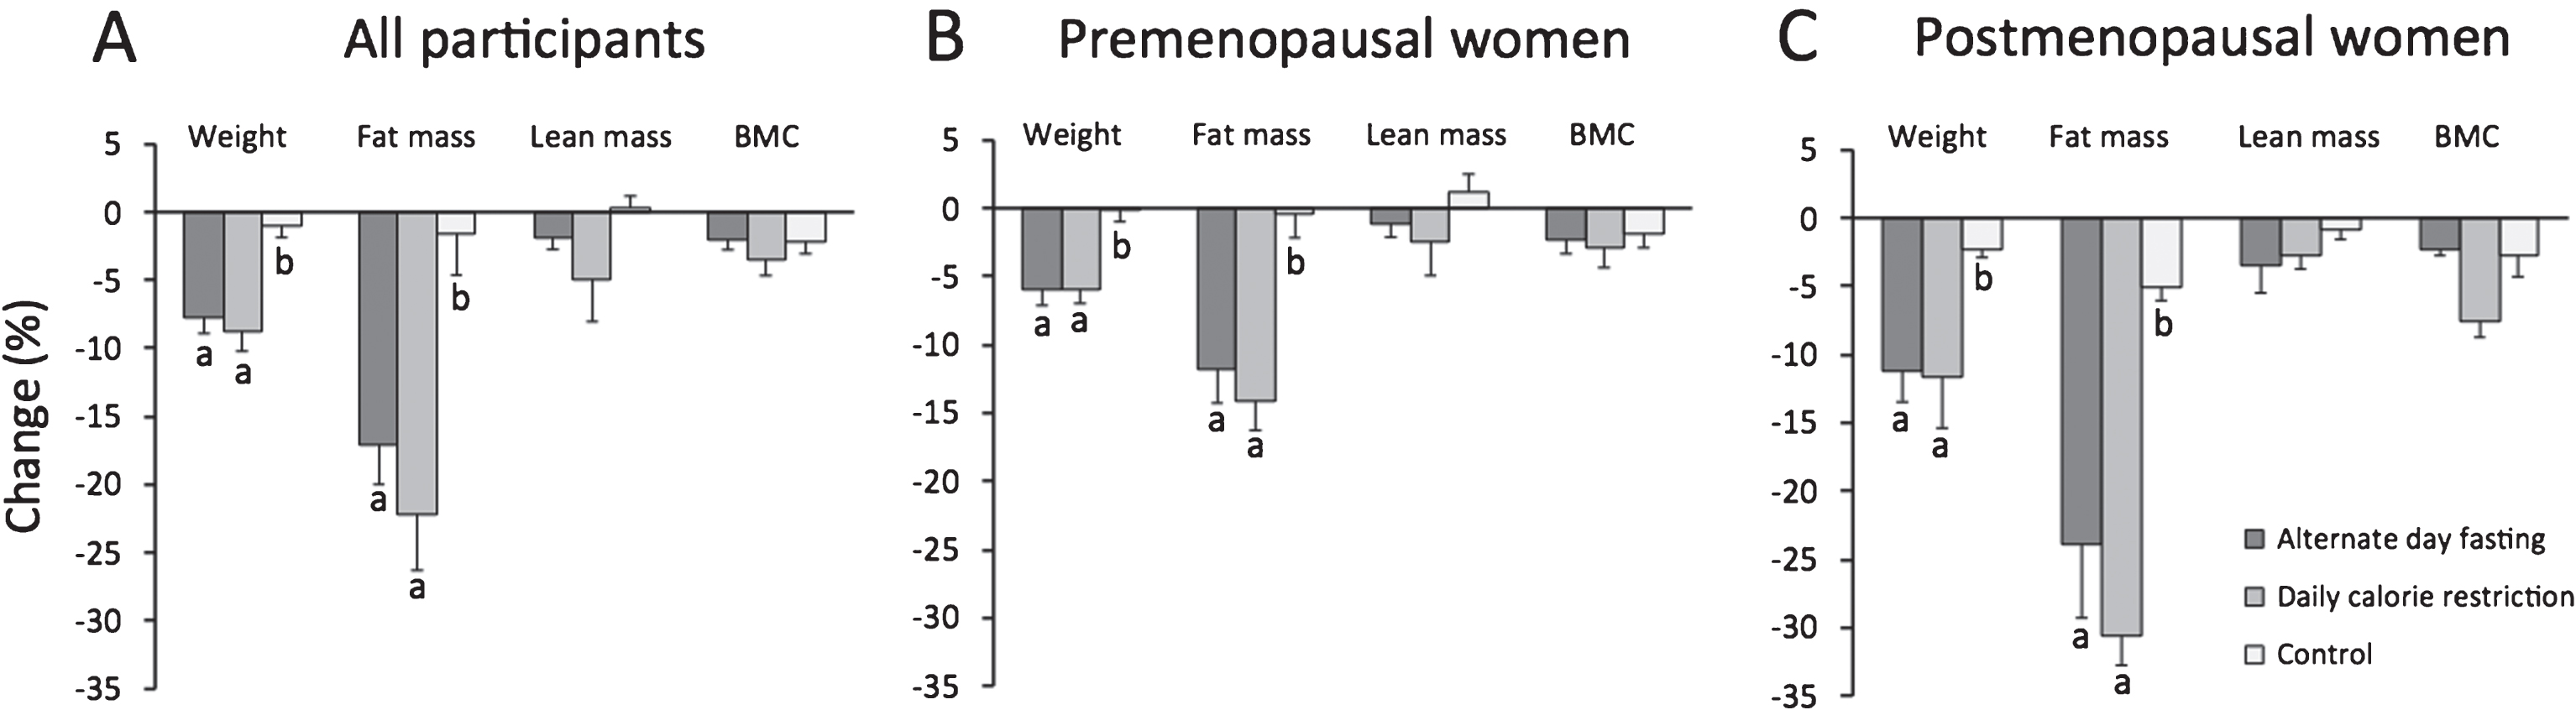 Change in body weight and body composition after 6 months. Mean±SEM. BMC: Bone mineral content. Means with different superscript values are significantly different (P < 0.01) for each body composition parameter. A. All participants: Body weight and fat mass decreased significantly (P < 0.01) in the ADF and CR groups, relative to controls. Lean mass and BMC remained unchanged in all groups. B. Premenopausal women: Body weight and fat mass decreased significantly (P < 0.01) in the ADF and CR groups, relative to controls. Lean mass and BMC remained unchanged in all groups. C. Postmenopausal women: Body weight and fat mass decreased significantly (P < 0.01) in the ADF and CR groups, relative to controls. Lean mass and BMC remained unchanged in all groups. Postmenopausal women lost more (P < 0.05) body weight and fat mass relative to premenopausal women in the same intervention group.